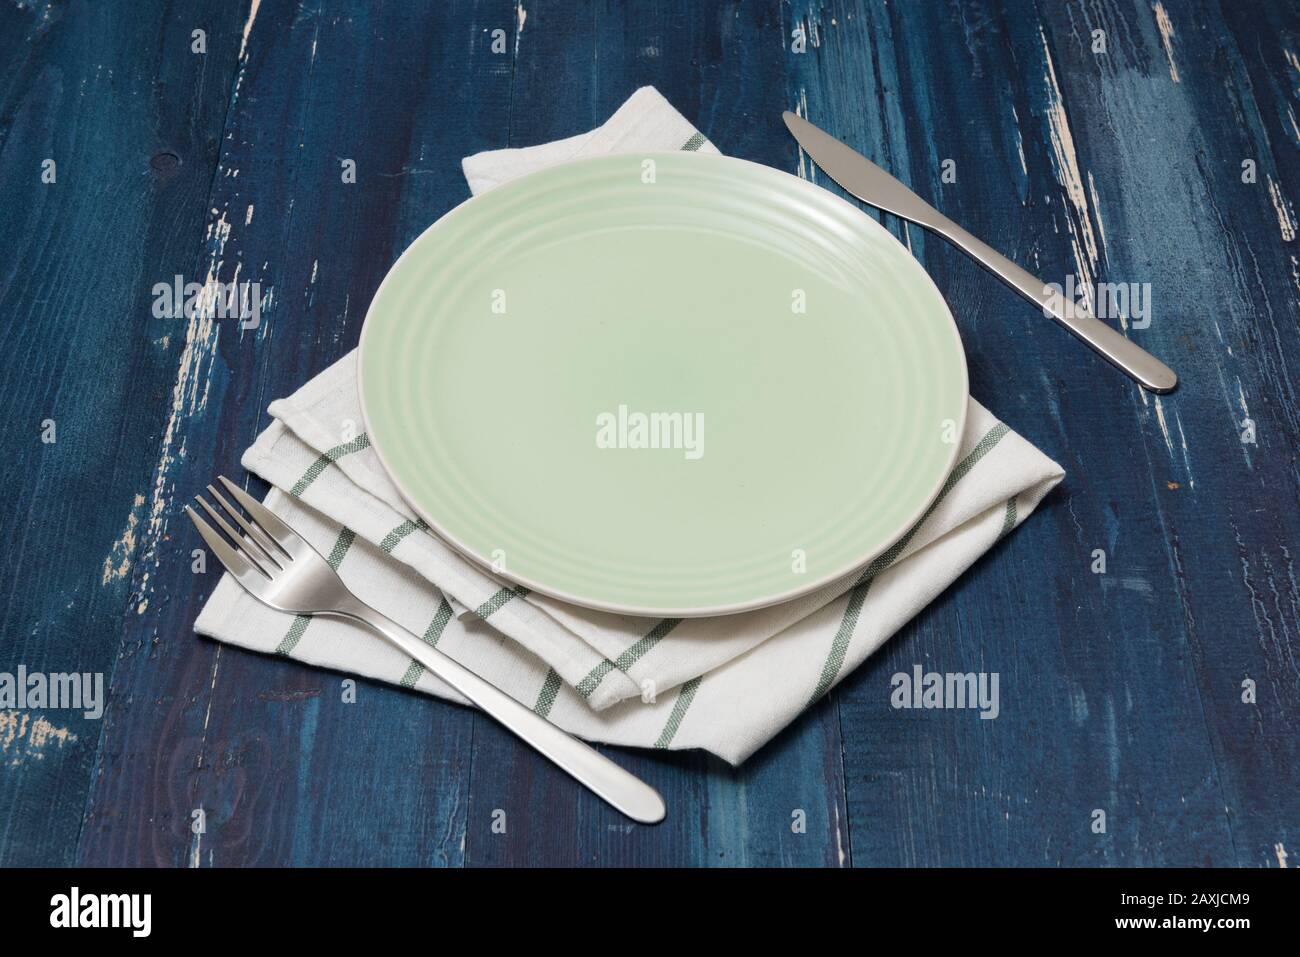 Green Round Plate with utensils and dish towel on ocean blue wooden table background side view Stock Photo